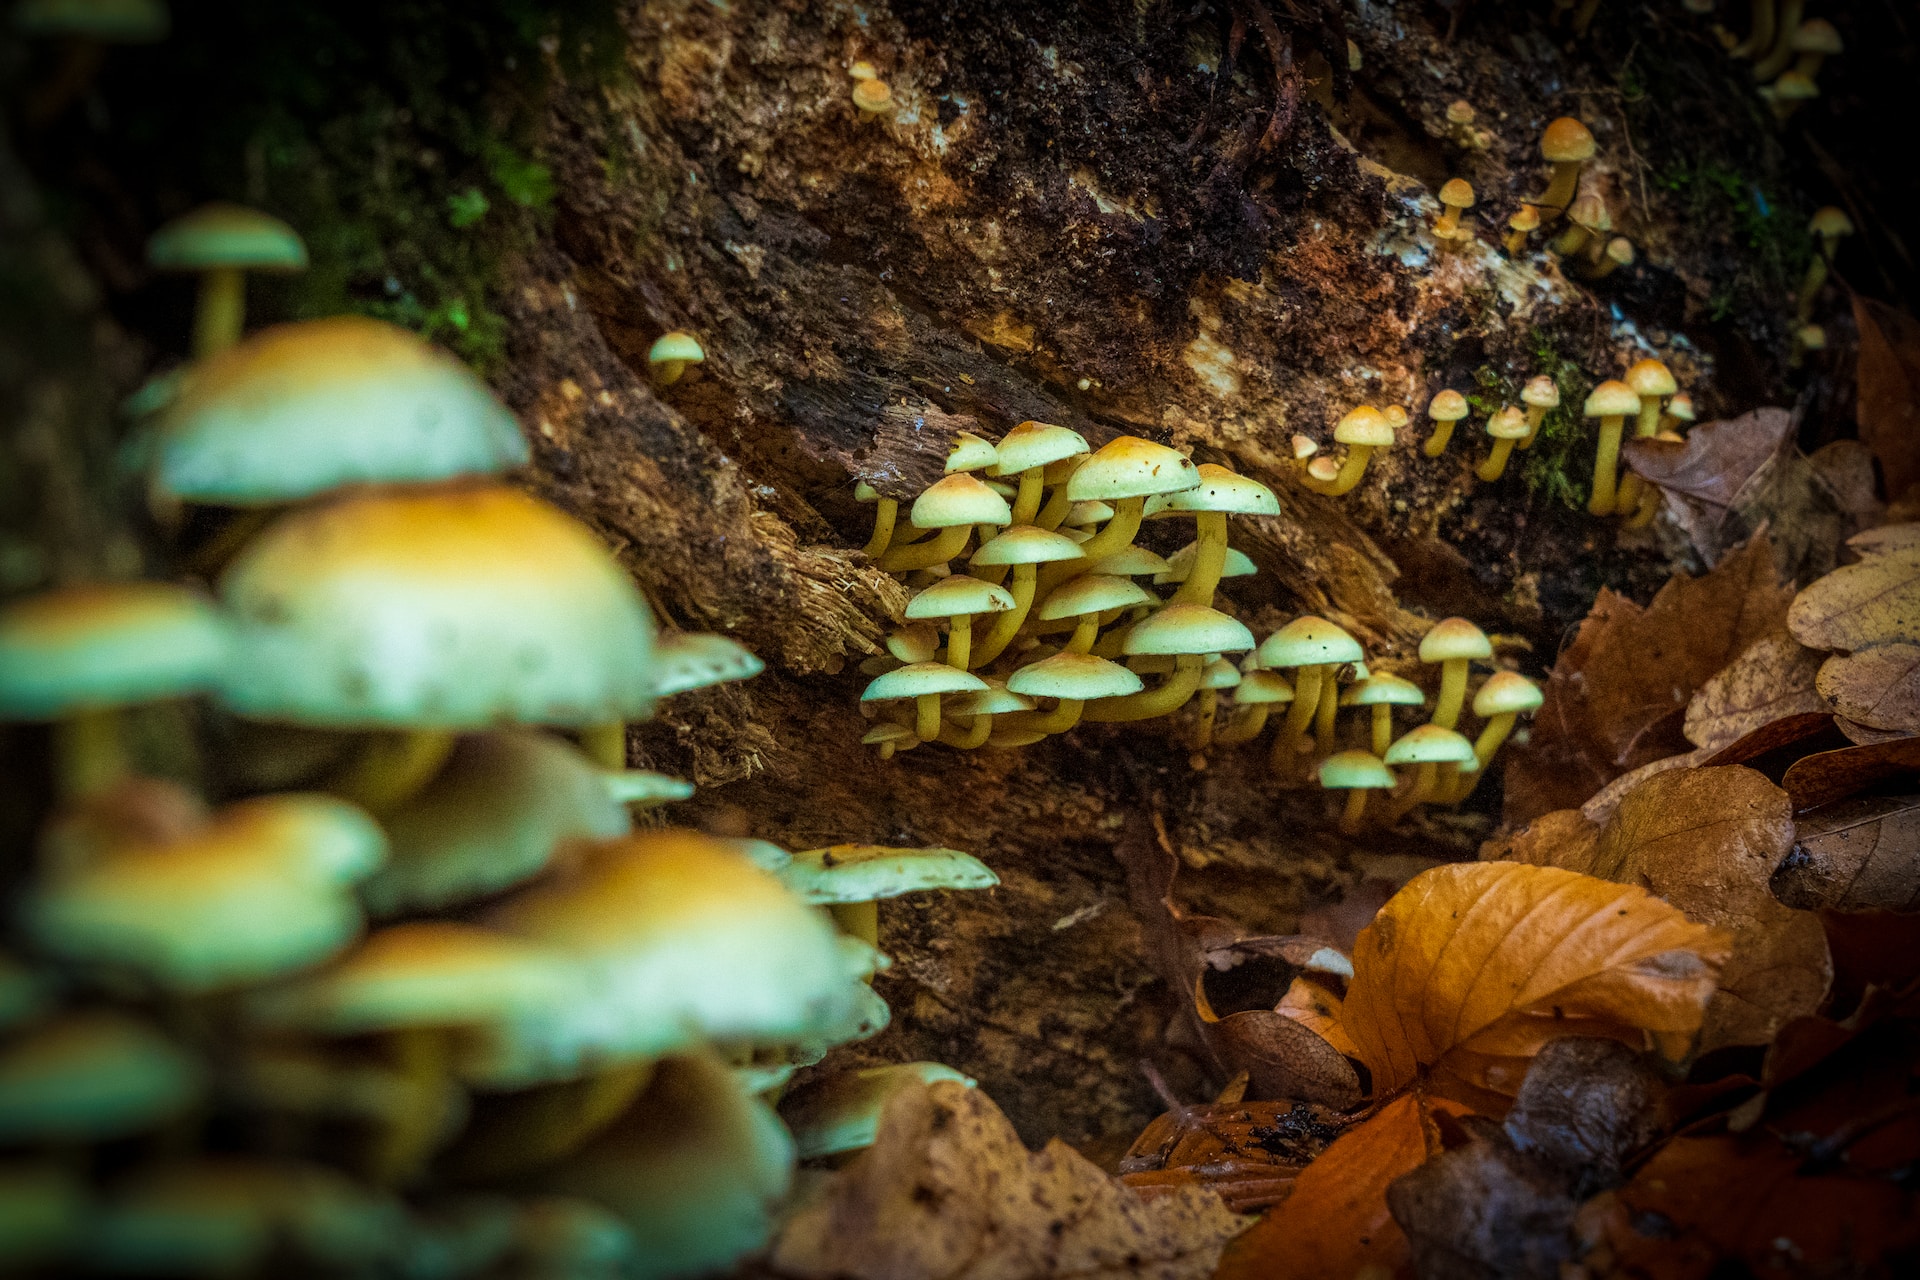 A group of psychotropic mushrooms growing on a tree stump.